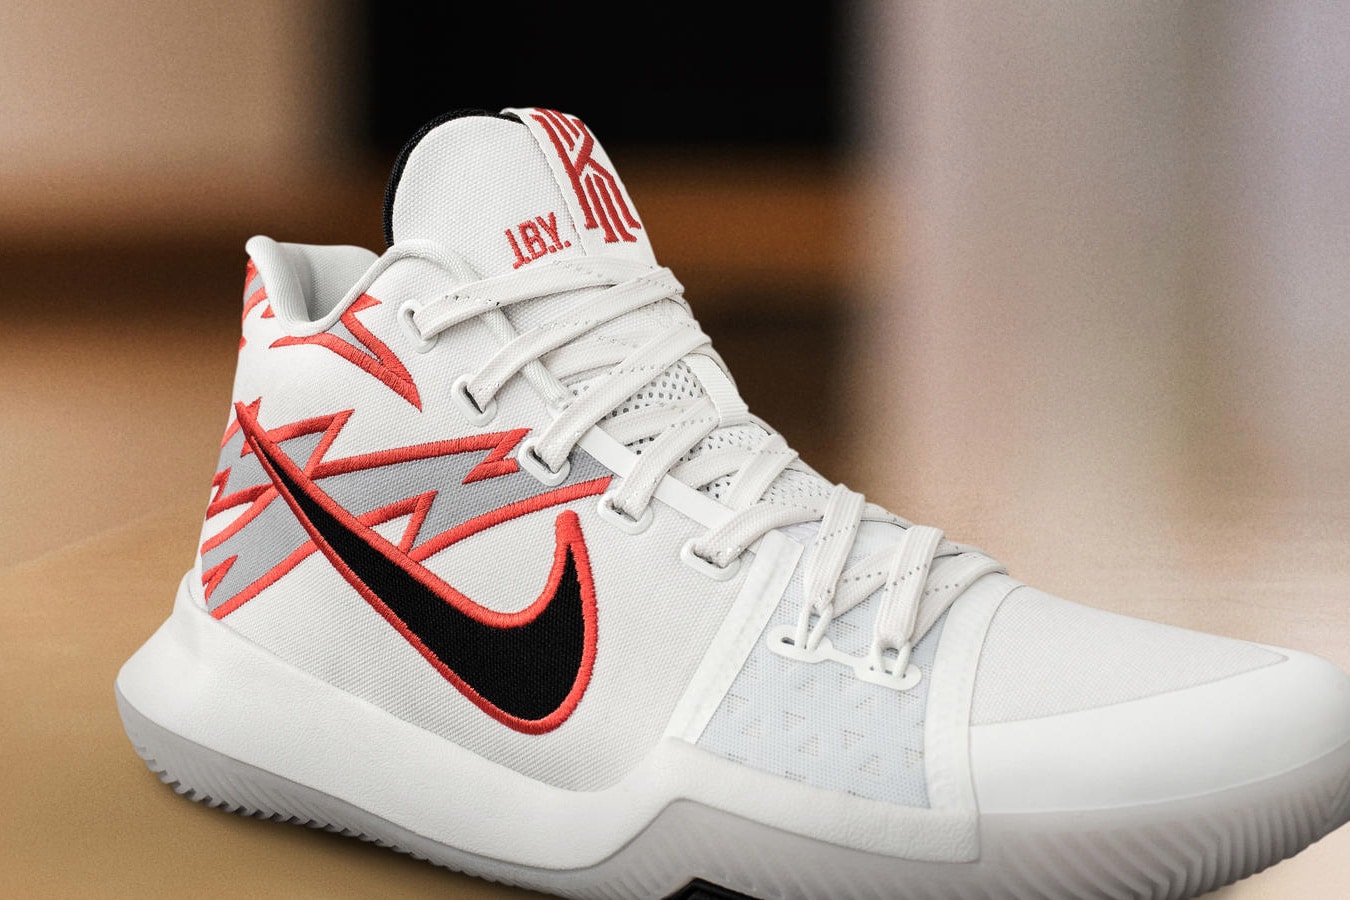 Nike Kyrie 3 PE Lightning Bolts White Grease